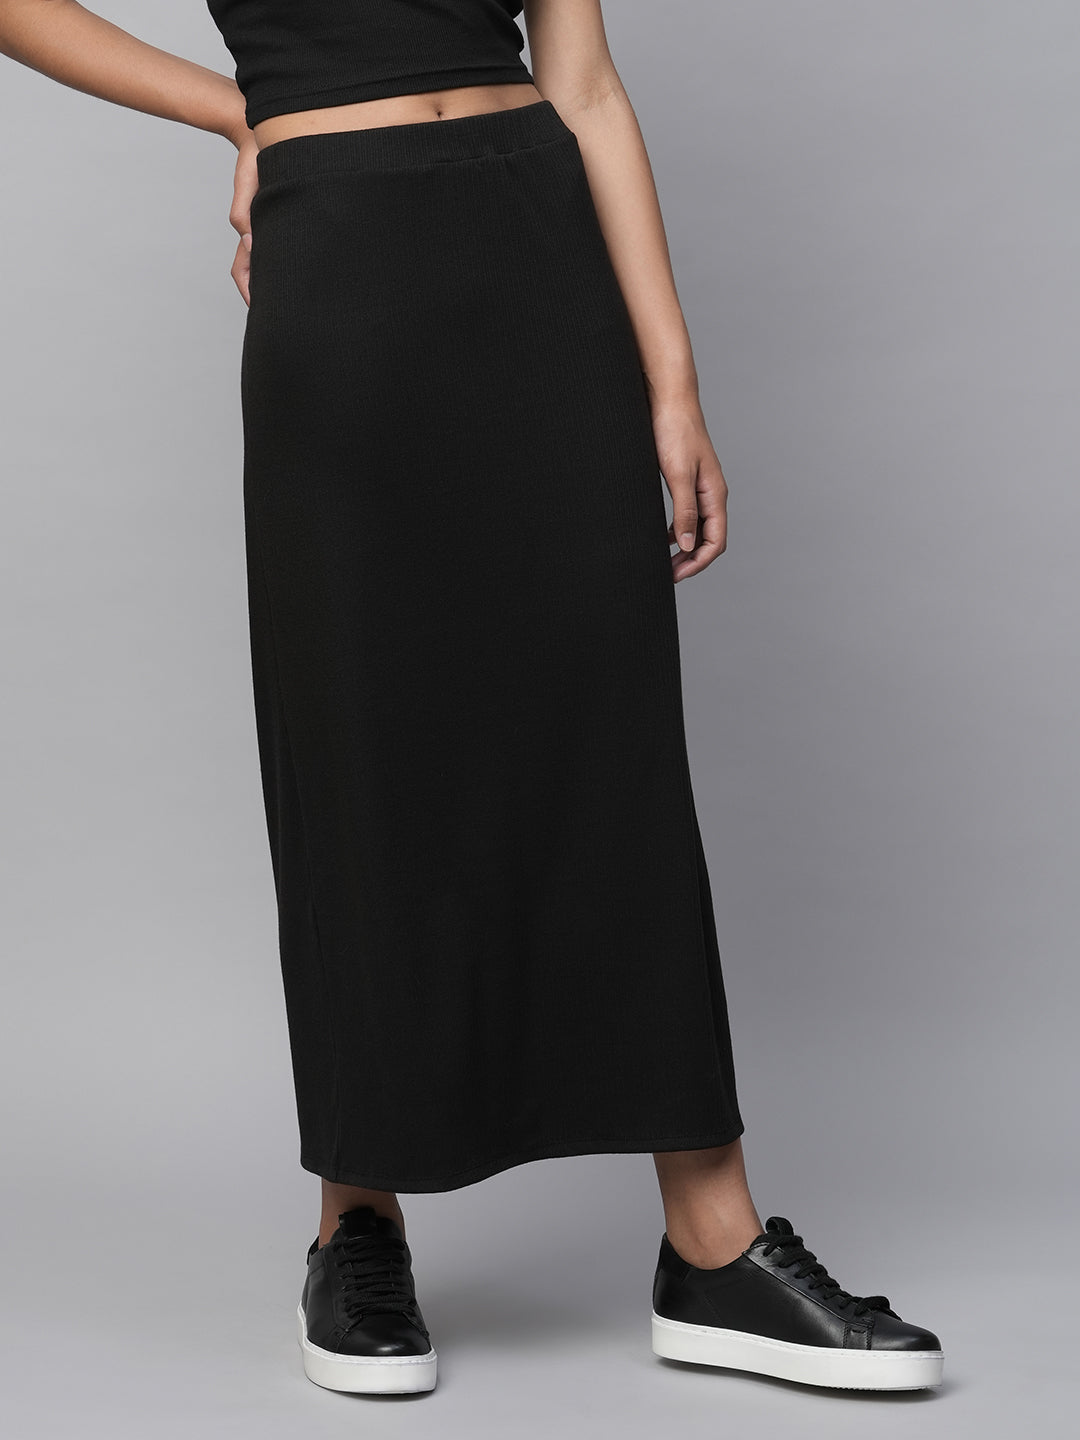 Ribbed Knit Pull On Lounge Skirt